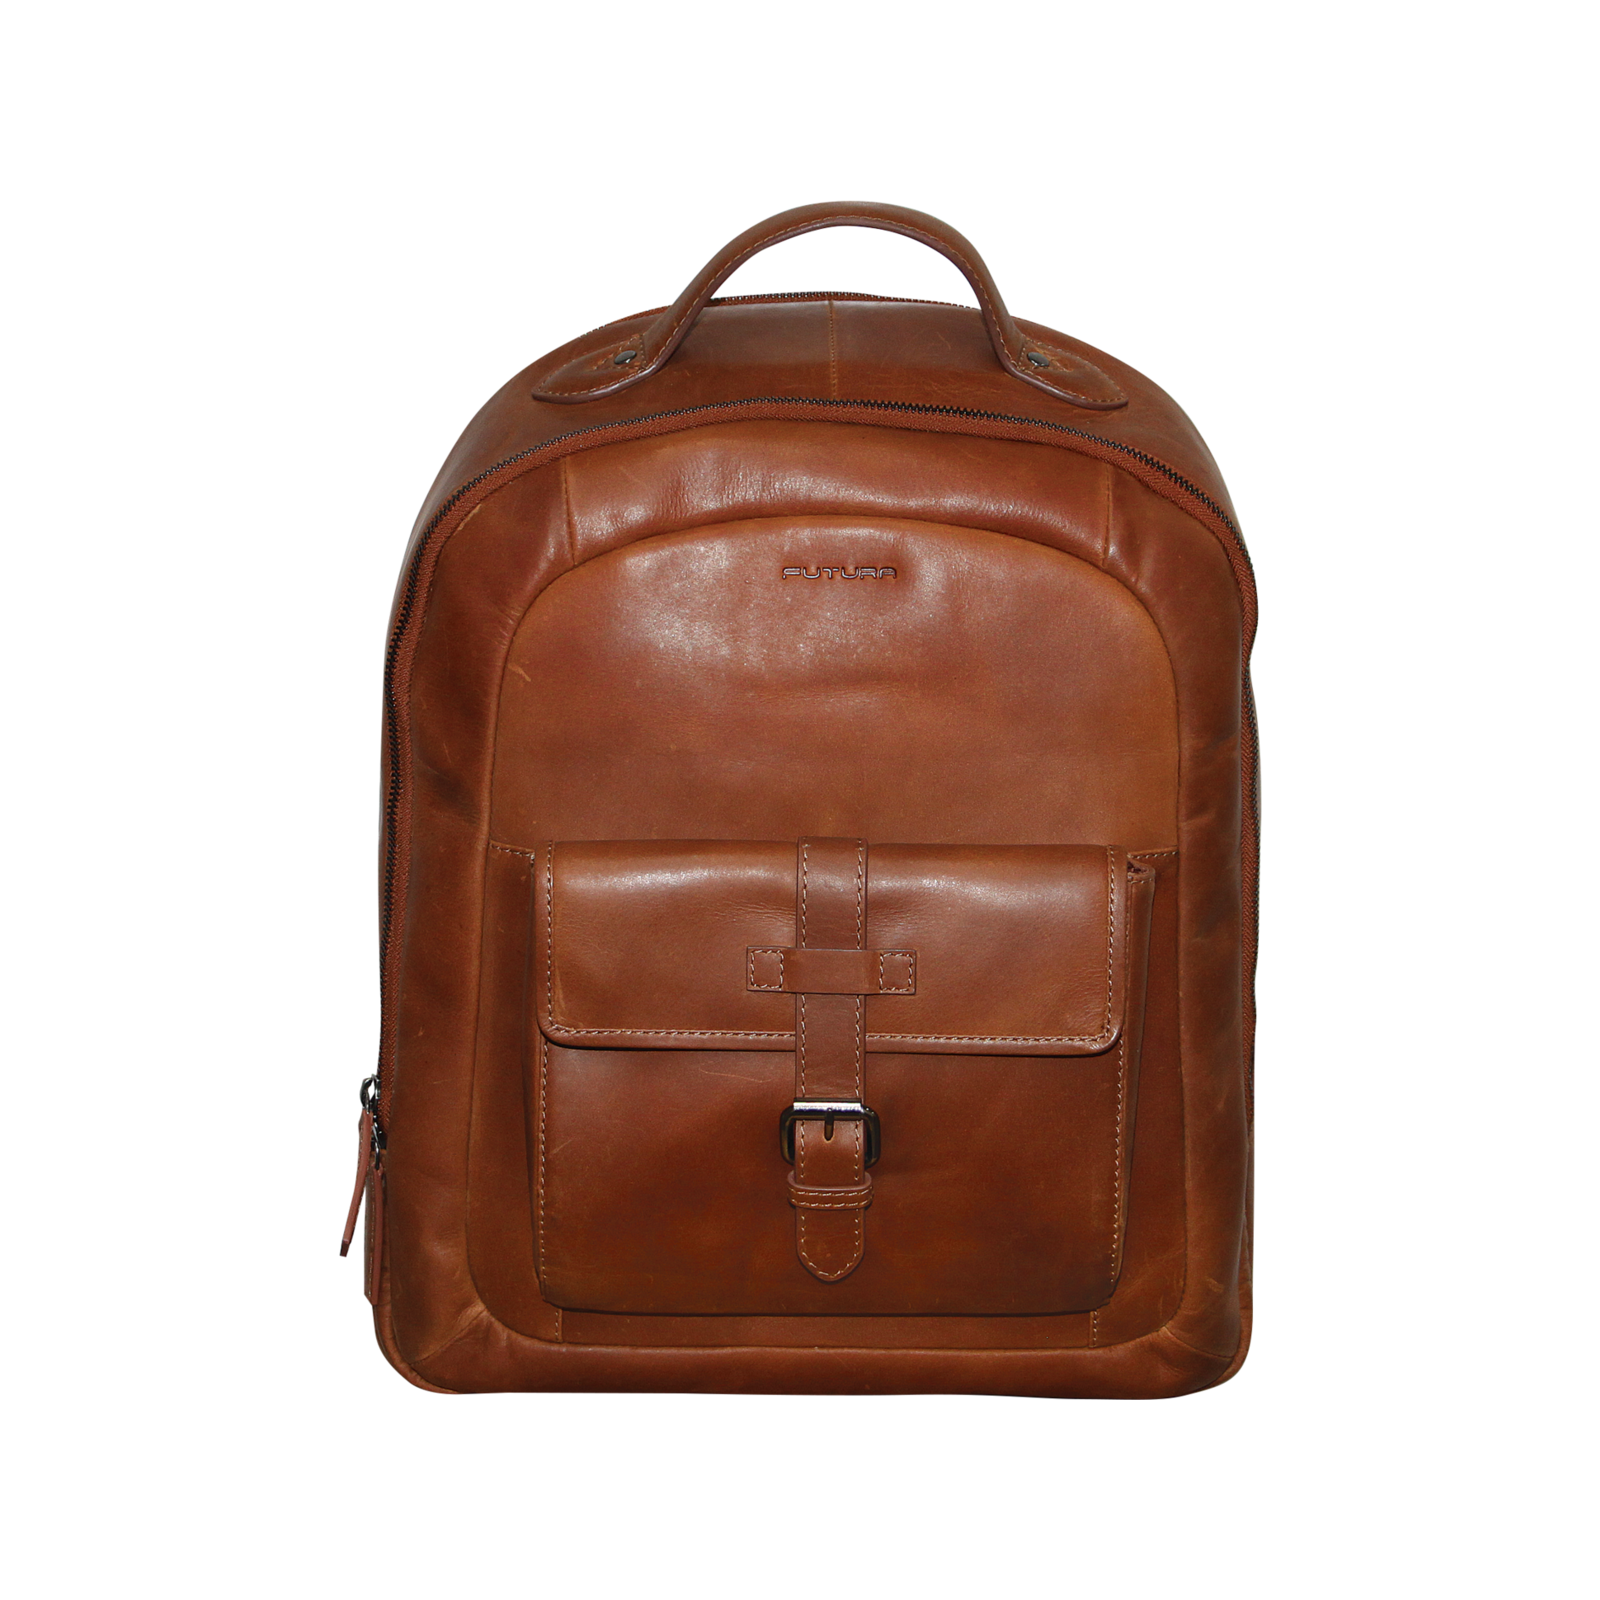 Futura Men's Leather Backpack Bag w Laptop Section Travel Luggage ...